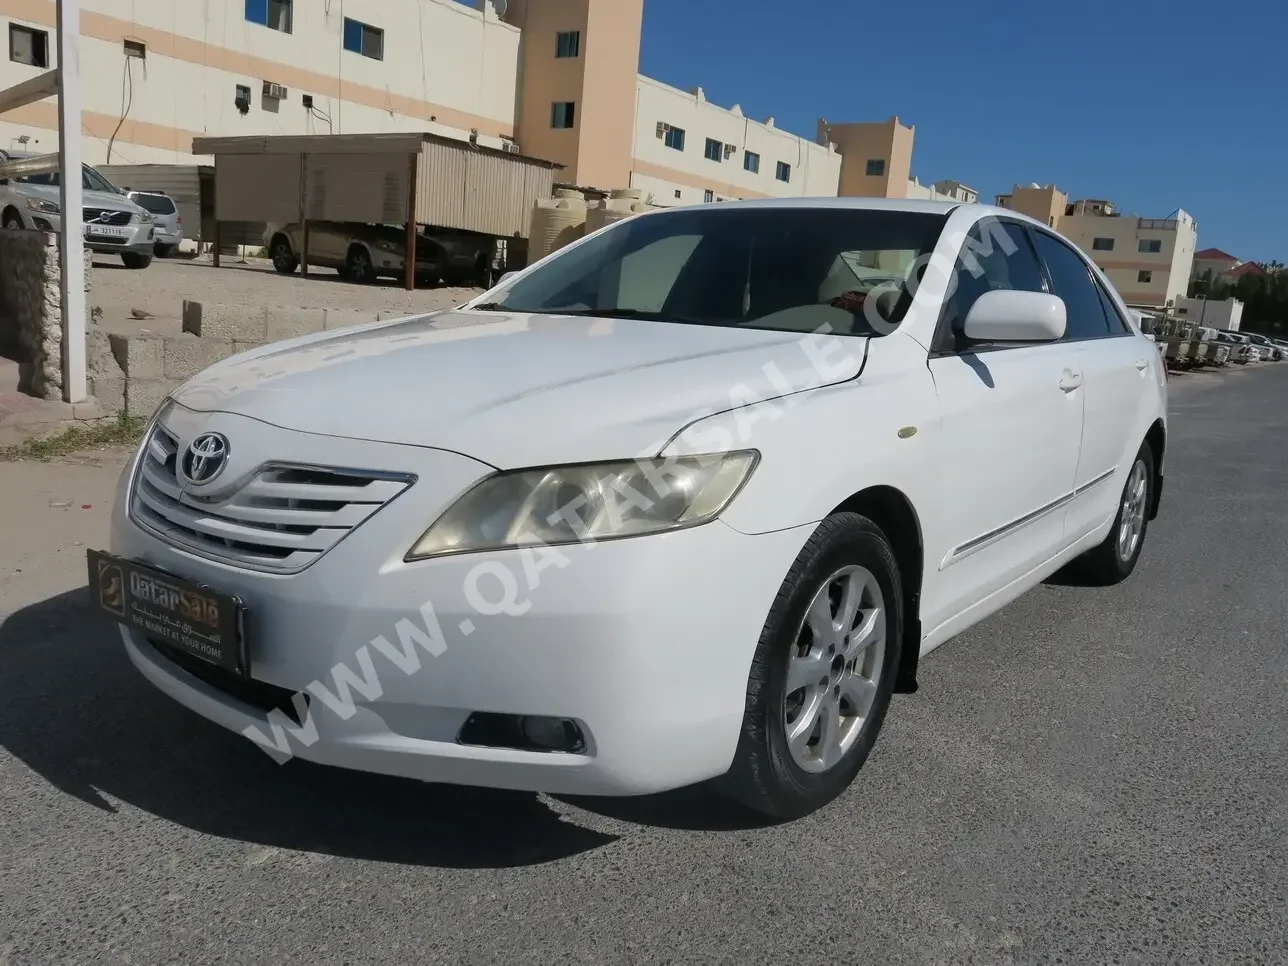 Toyota  Camry  2008  Automatic  300,000 Km  4 Cylinder  Front Wheel Drive (FWD)  Sedan  White